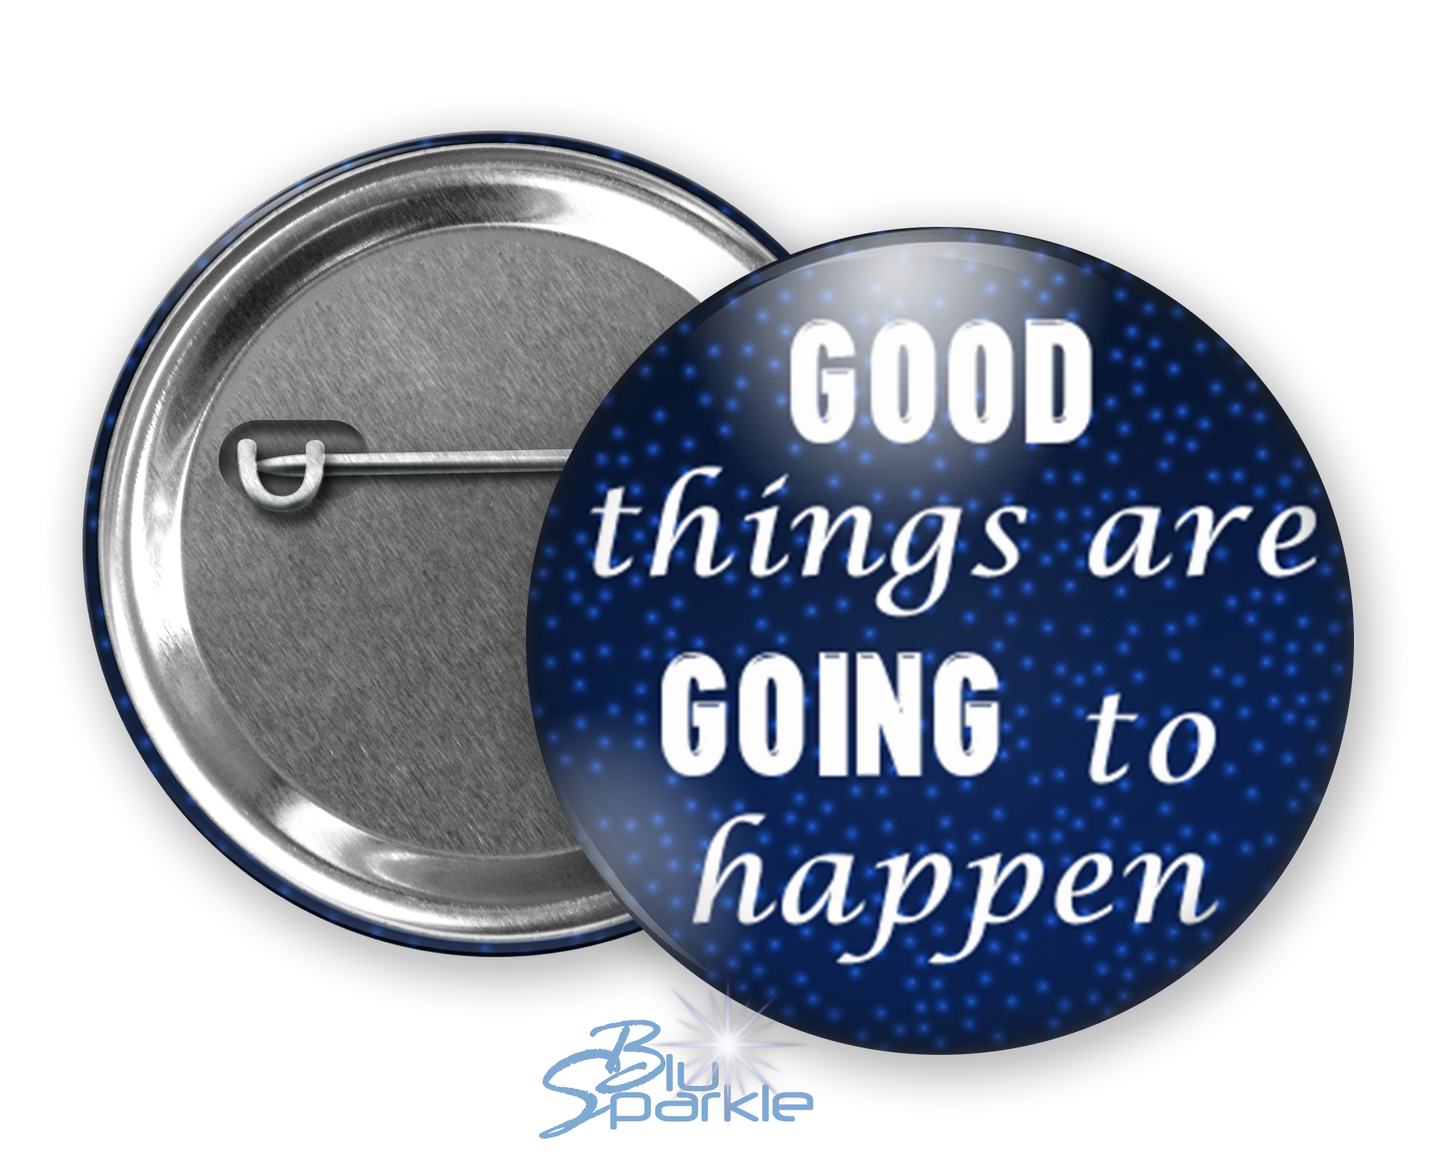 Good Things Are Going To Happen - Pinback Buttons